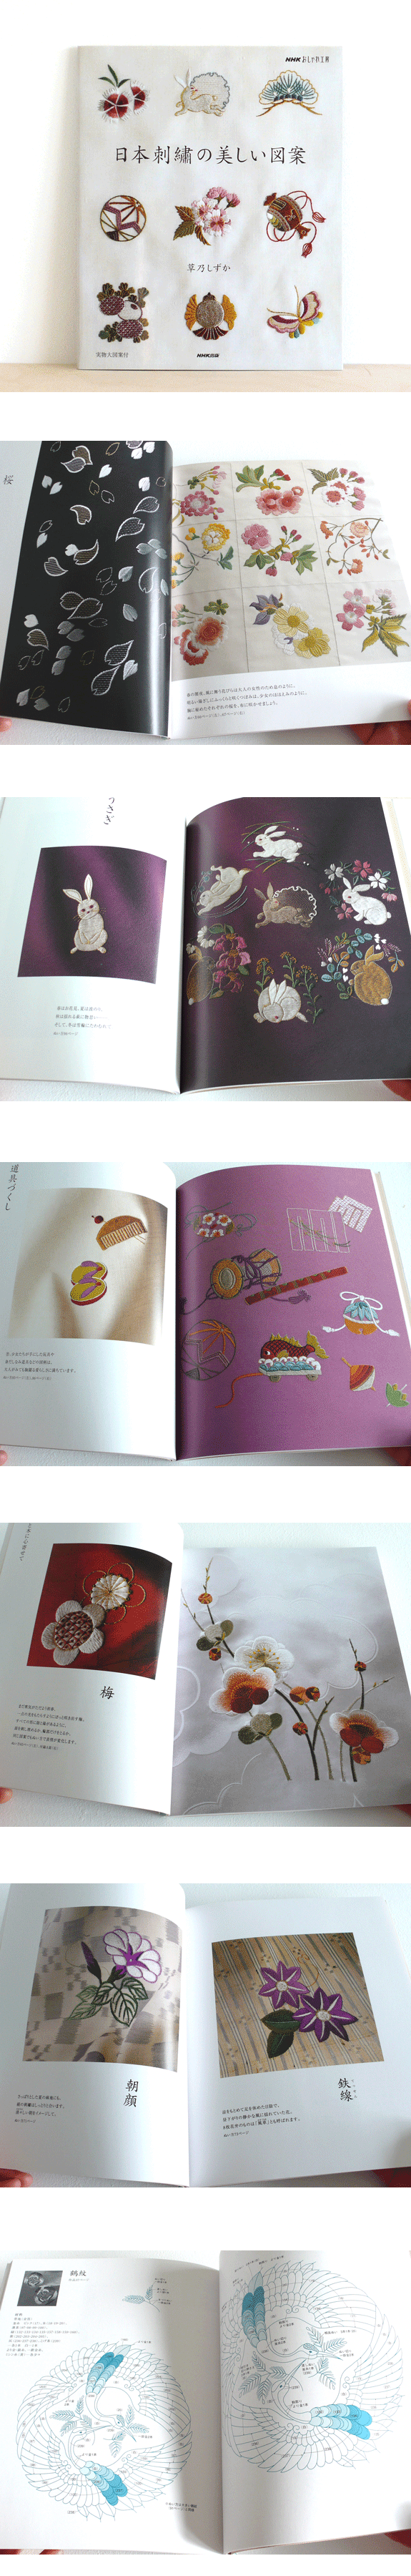 japanese embroidery book [learn japanese embroidery, japanese embroidery, traditional japanese sewing]